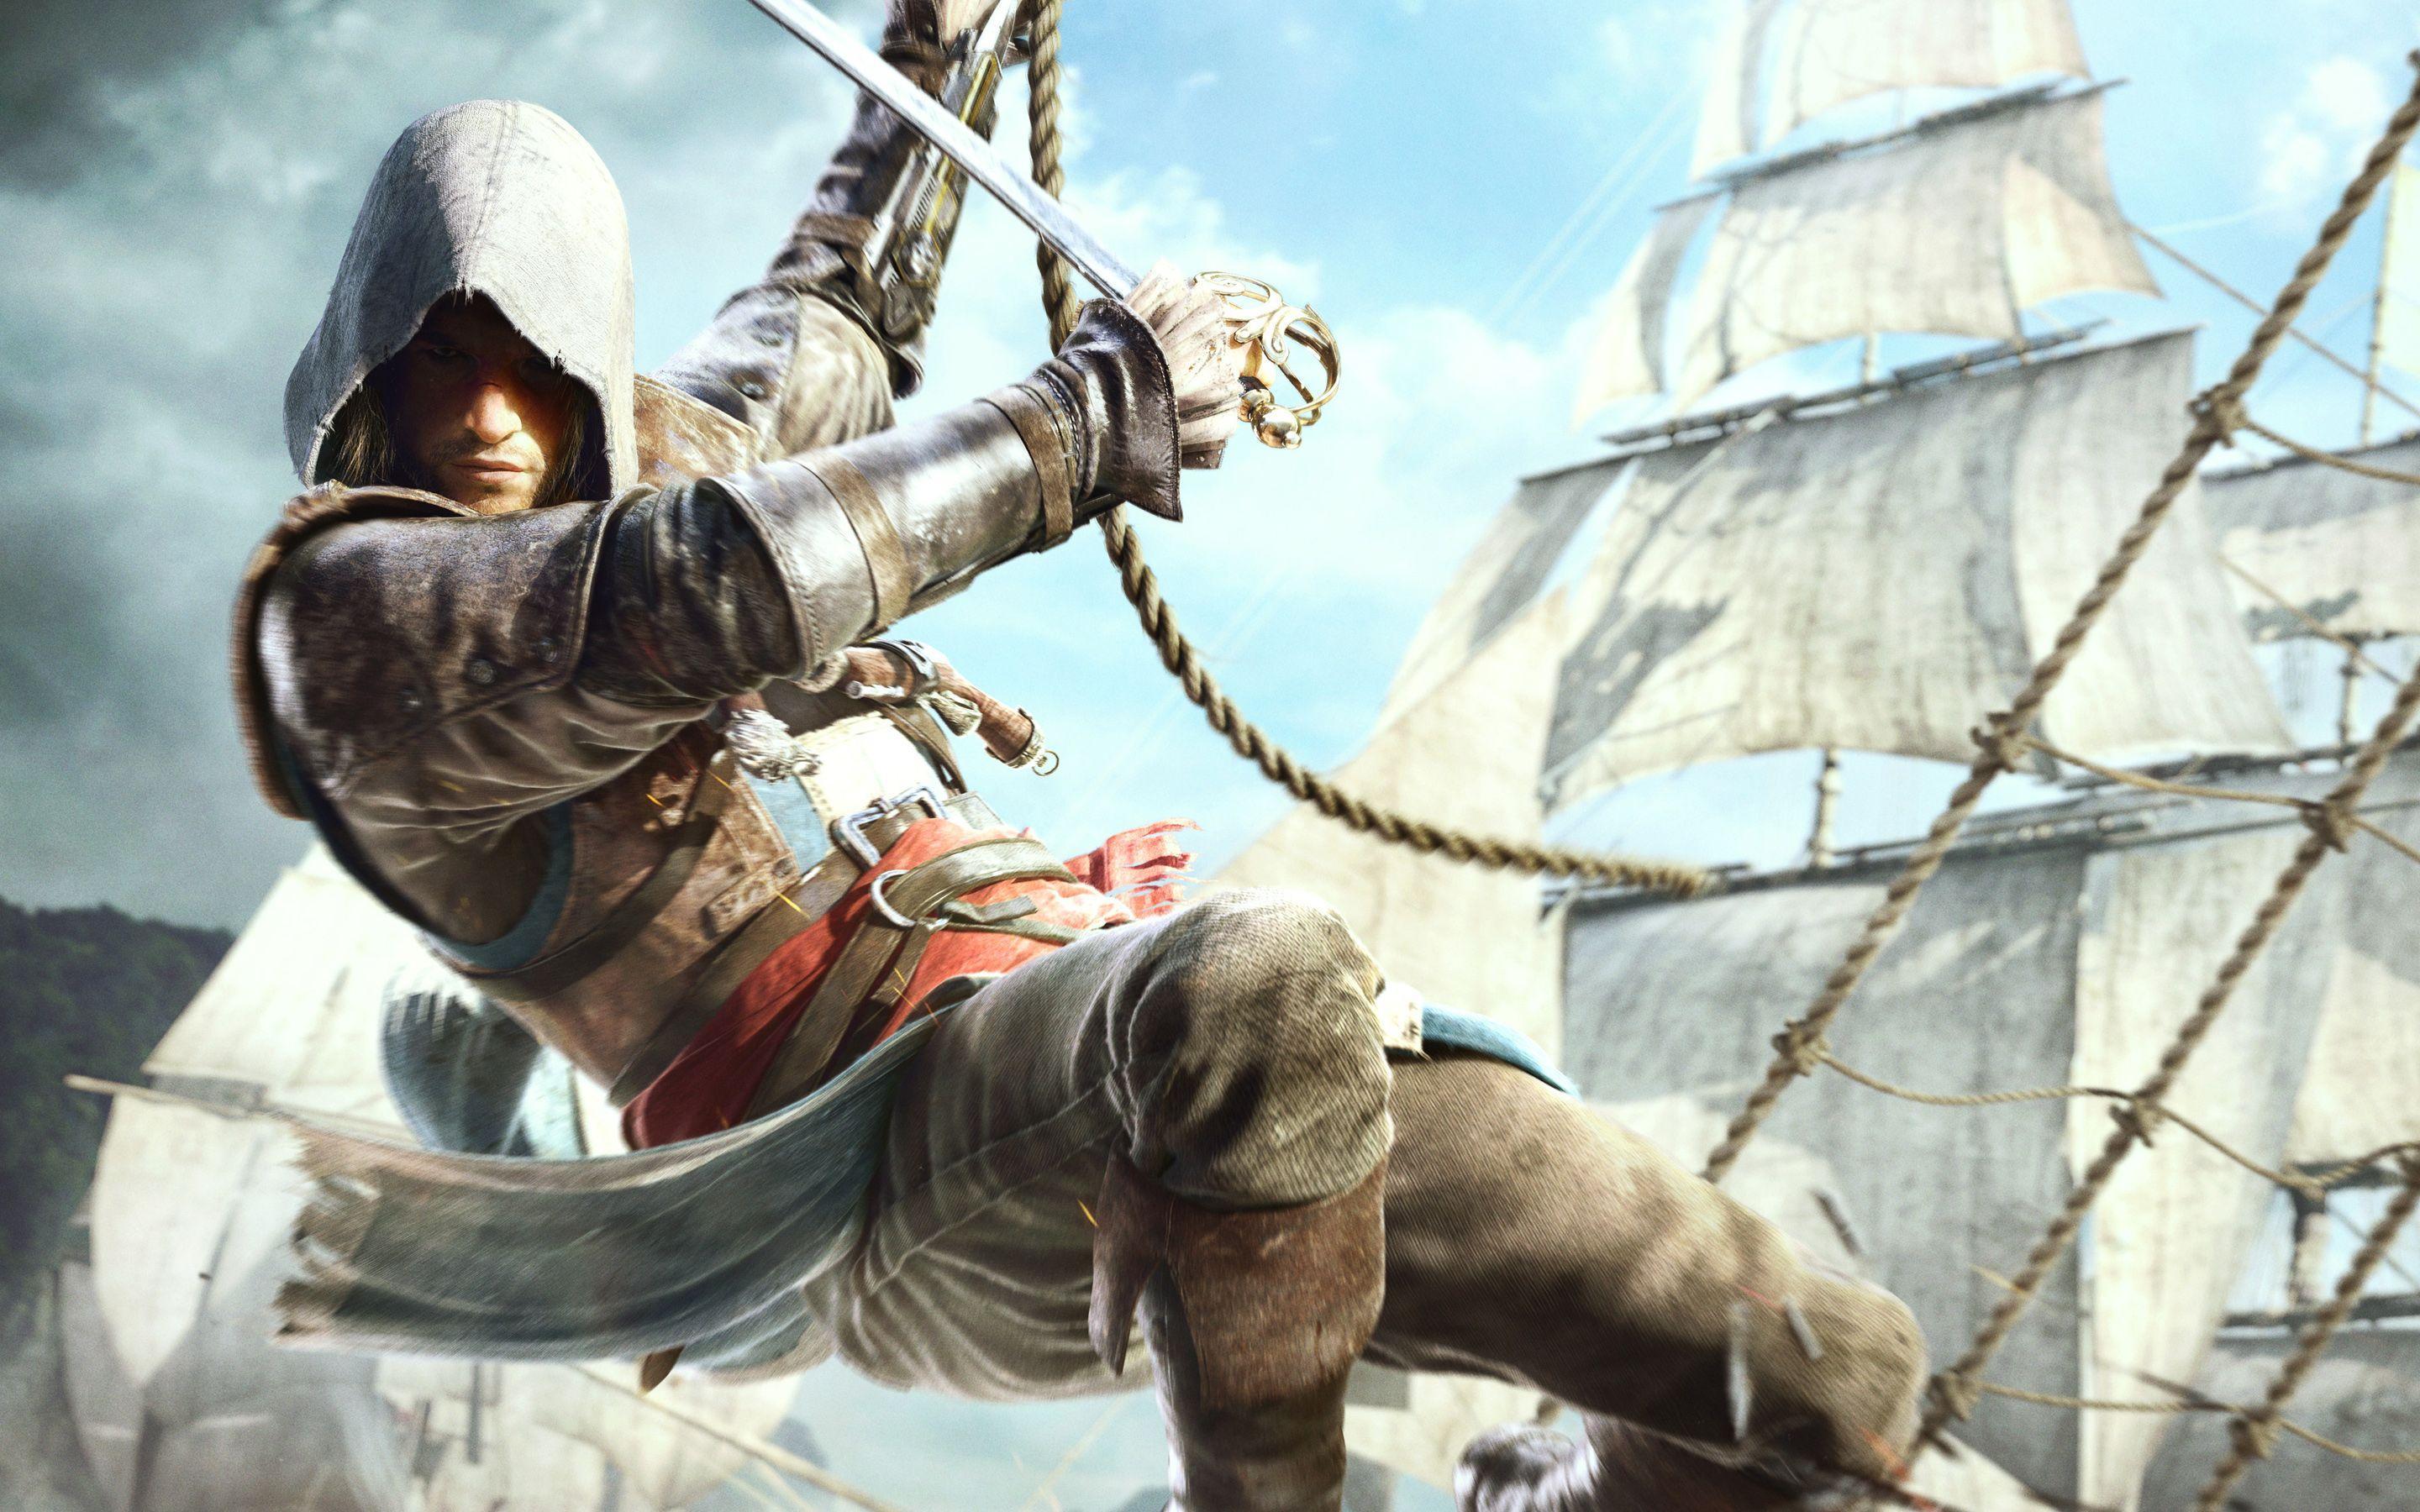 Edward Kenway in Assassin's Creed 4 Wallpaper